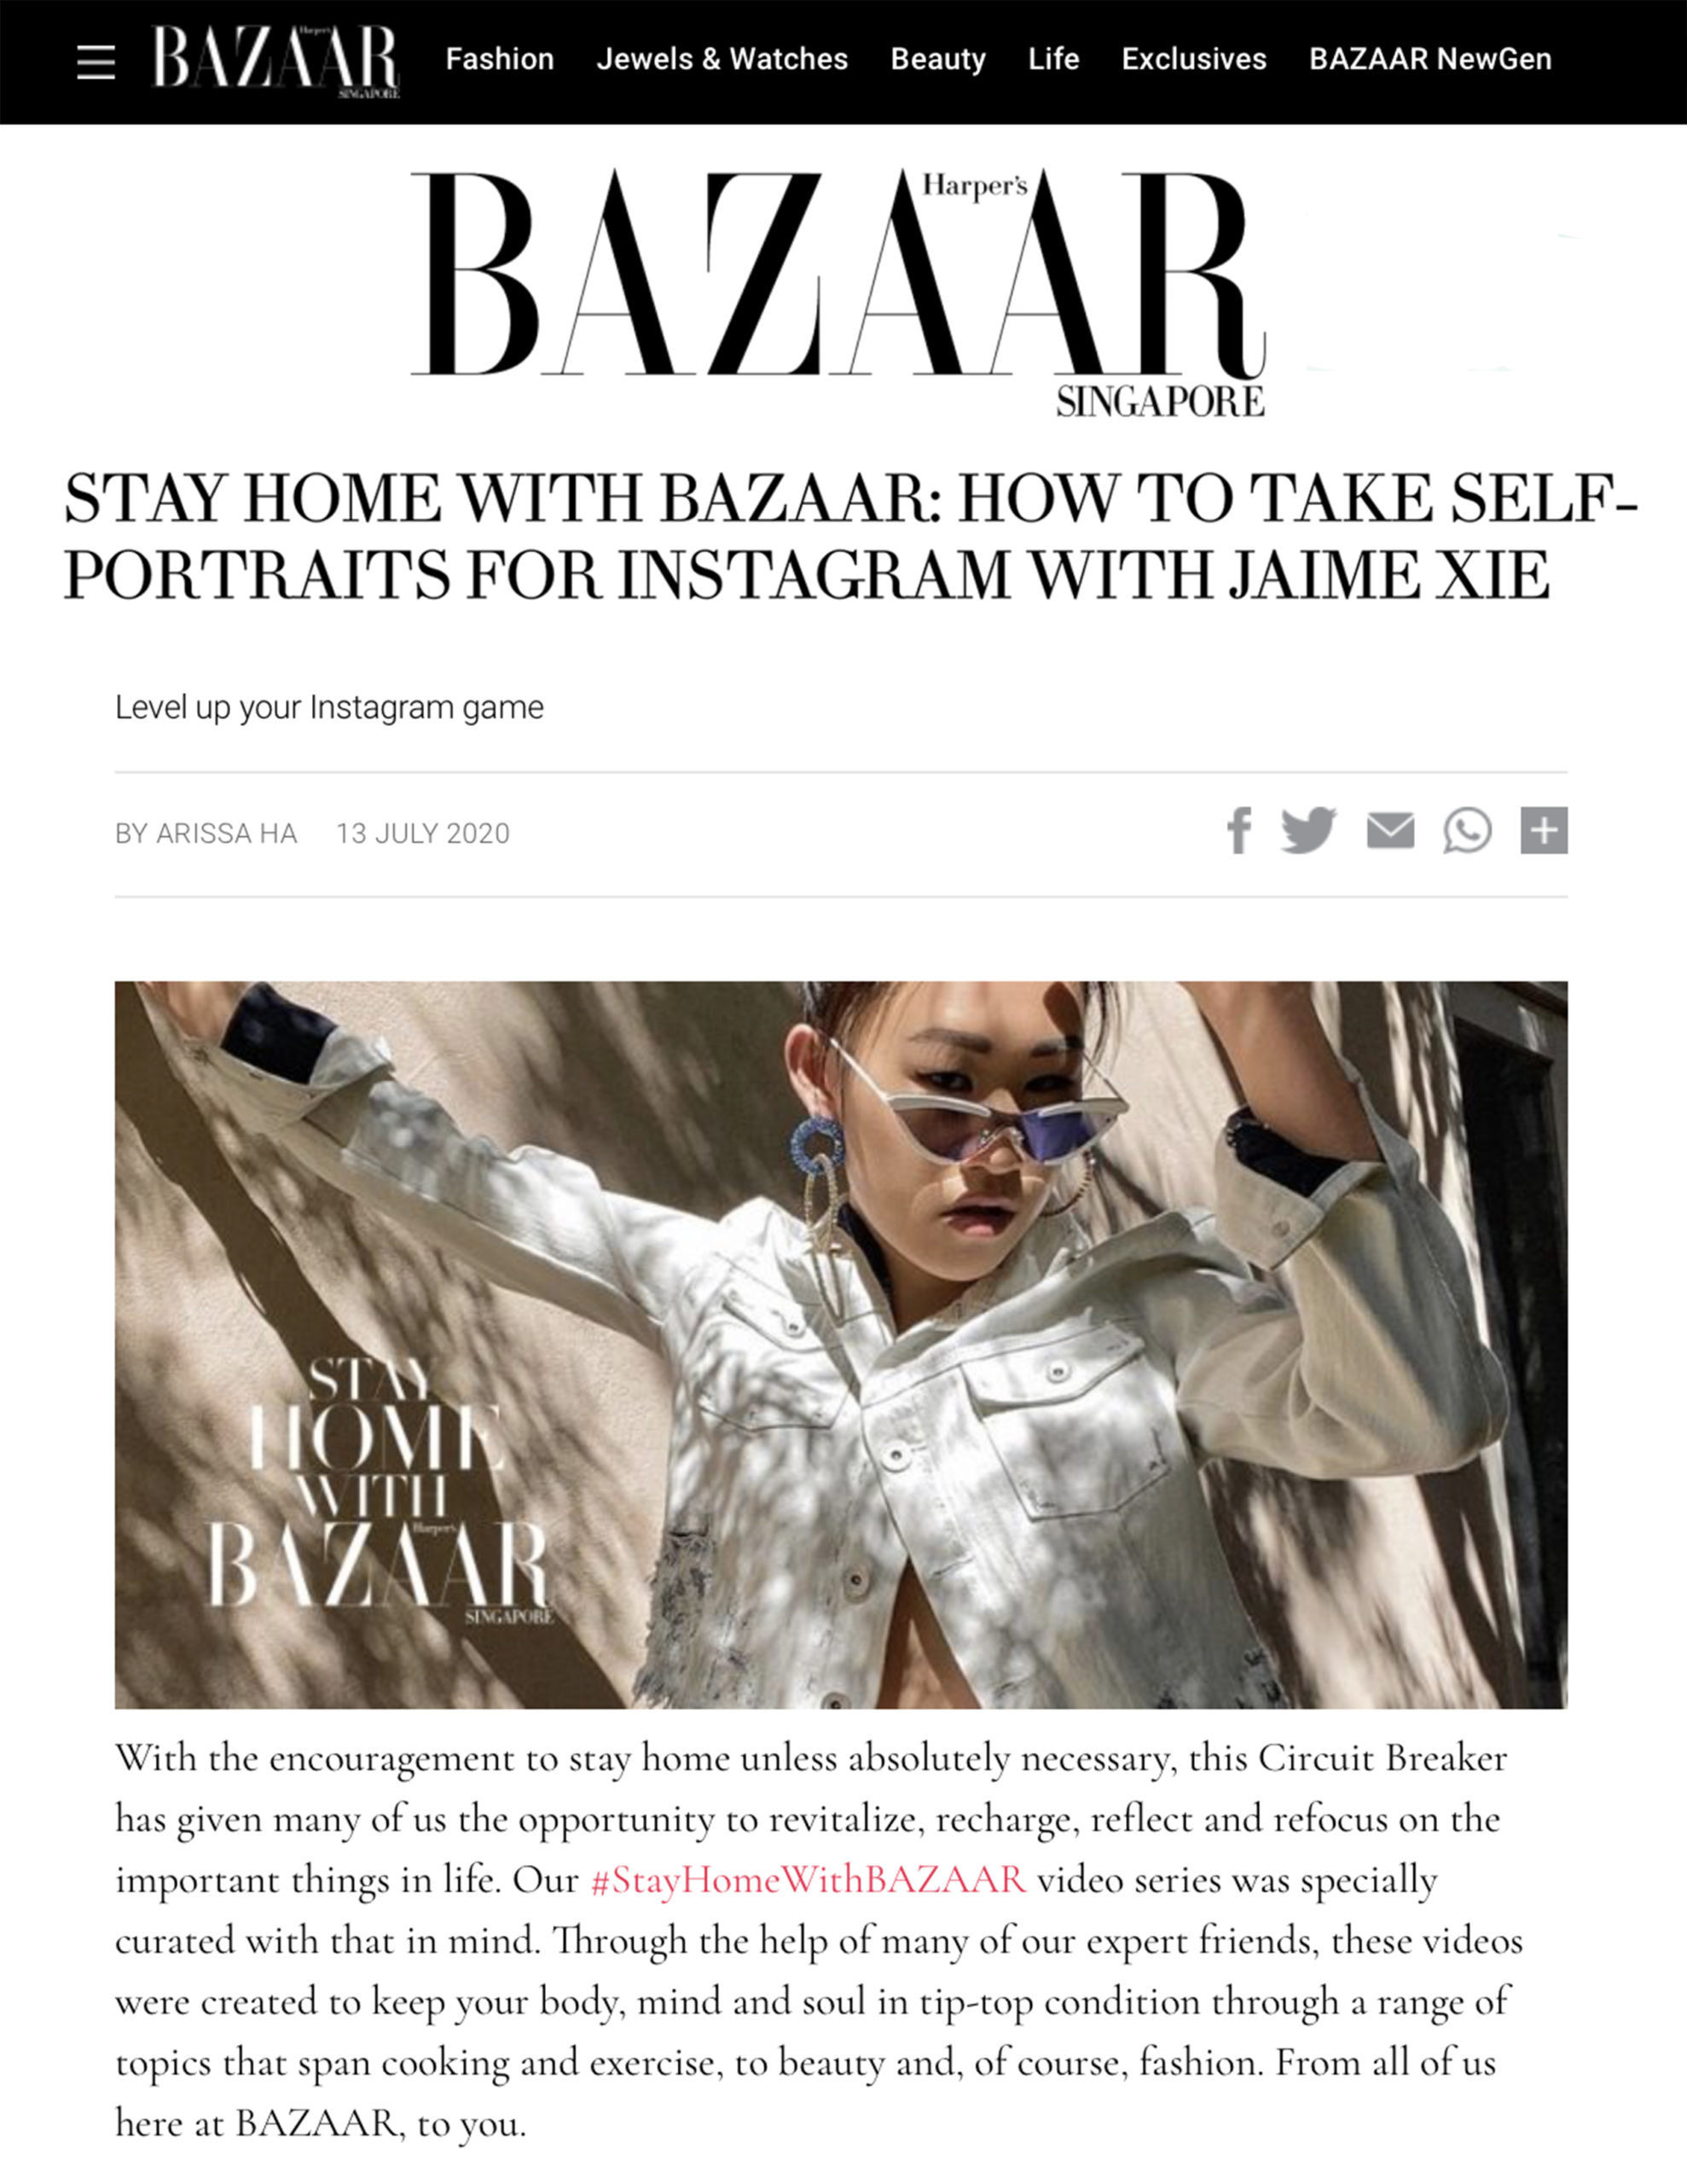 Harpers Bazaar Singapore: Stay Home With Bazaar – How To Take Self-Portraits for Instagram with Jaime Xie